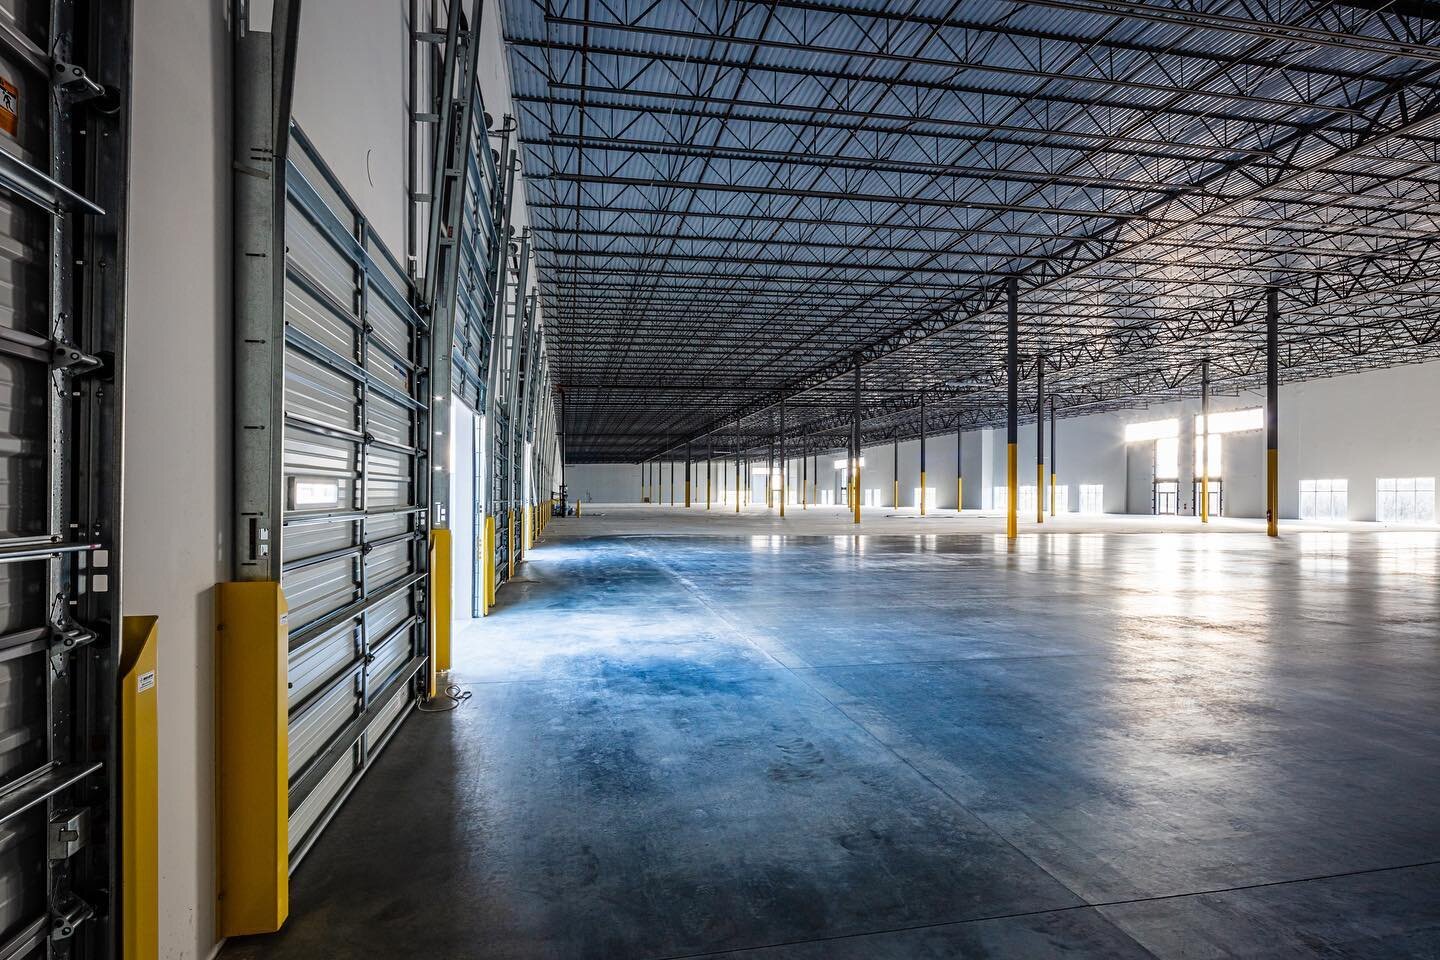 #architecturalphotography is our passion!  #flphotographer 
.
.
.
.
.
.
#architecture #architecturelovers #architectural #interior #interiorphotography #warehouse #warehousesale #photography #newconstruction #concrete #realestate #realestateflorida #